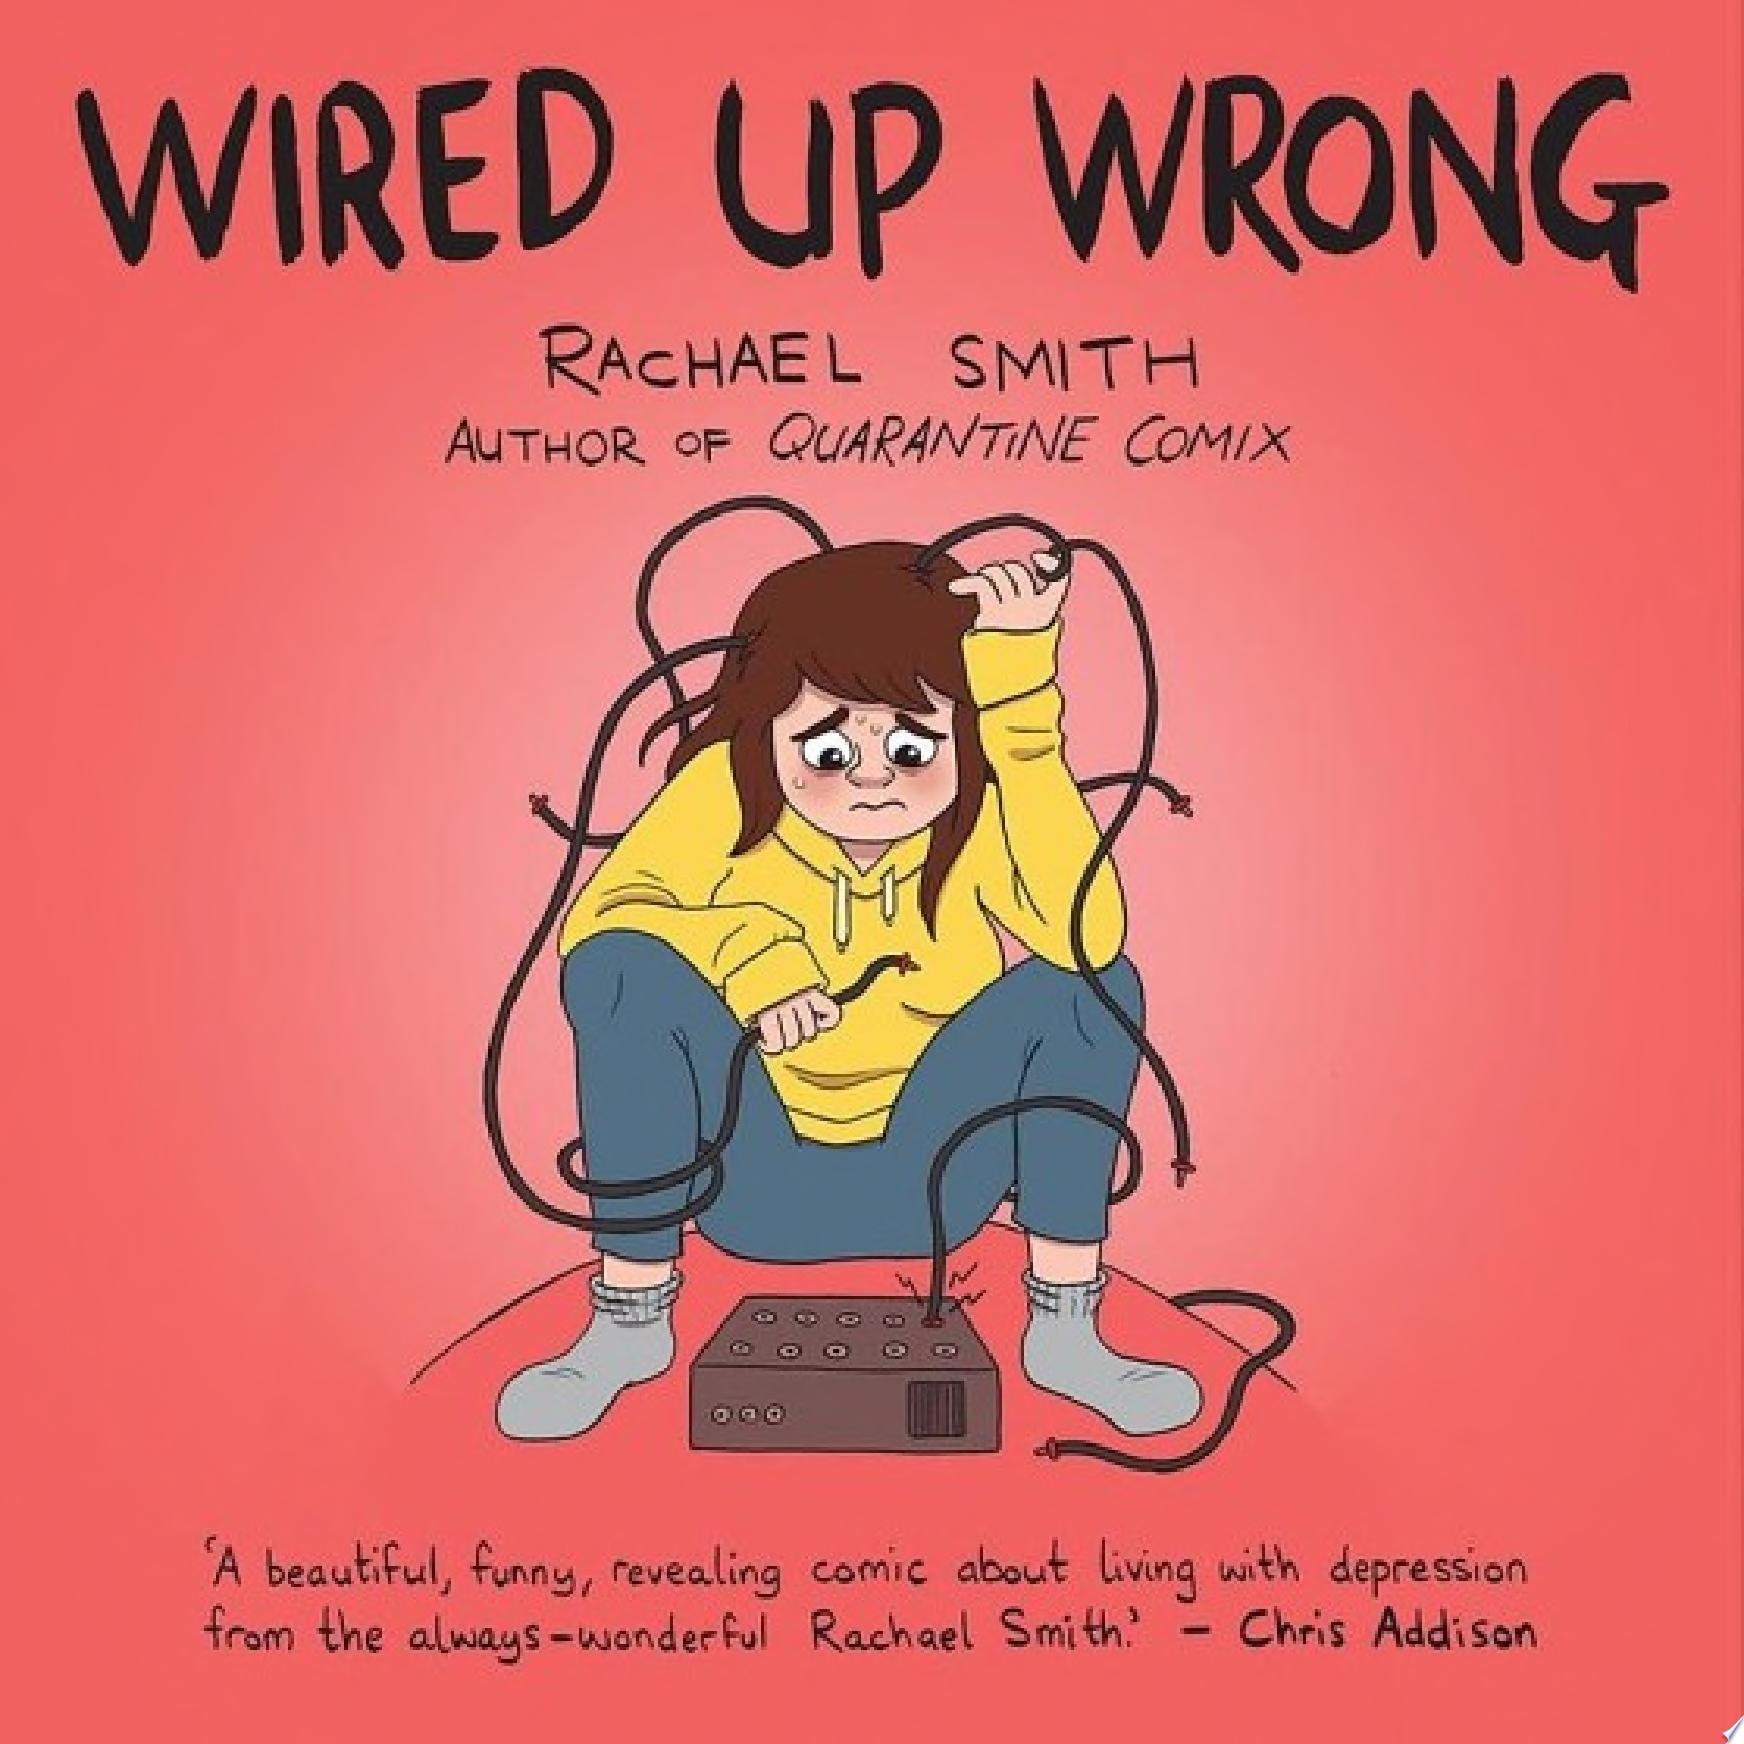 Image for "Wired Up Wrong"